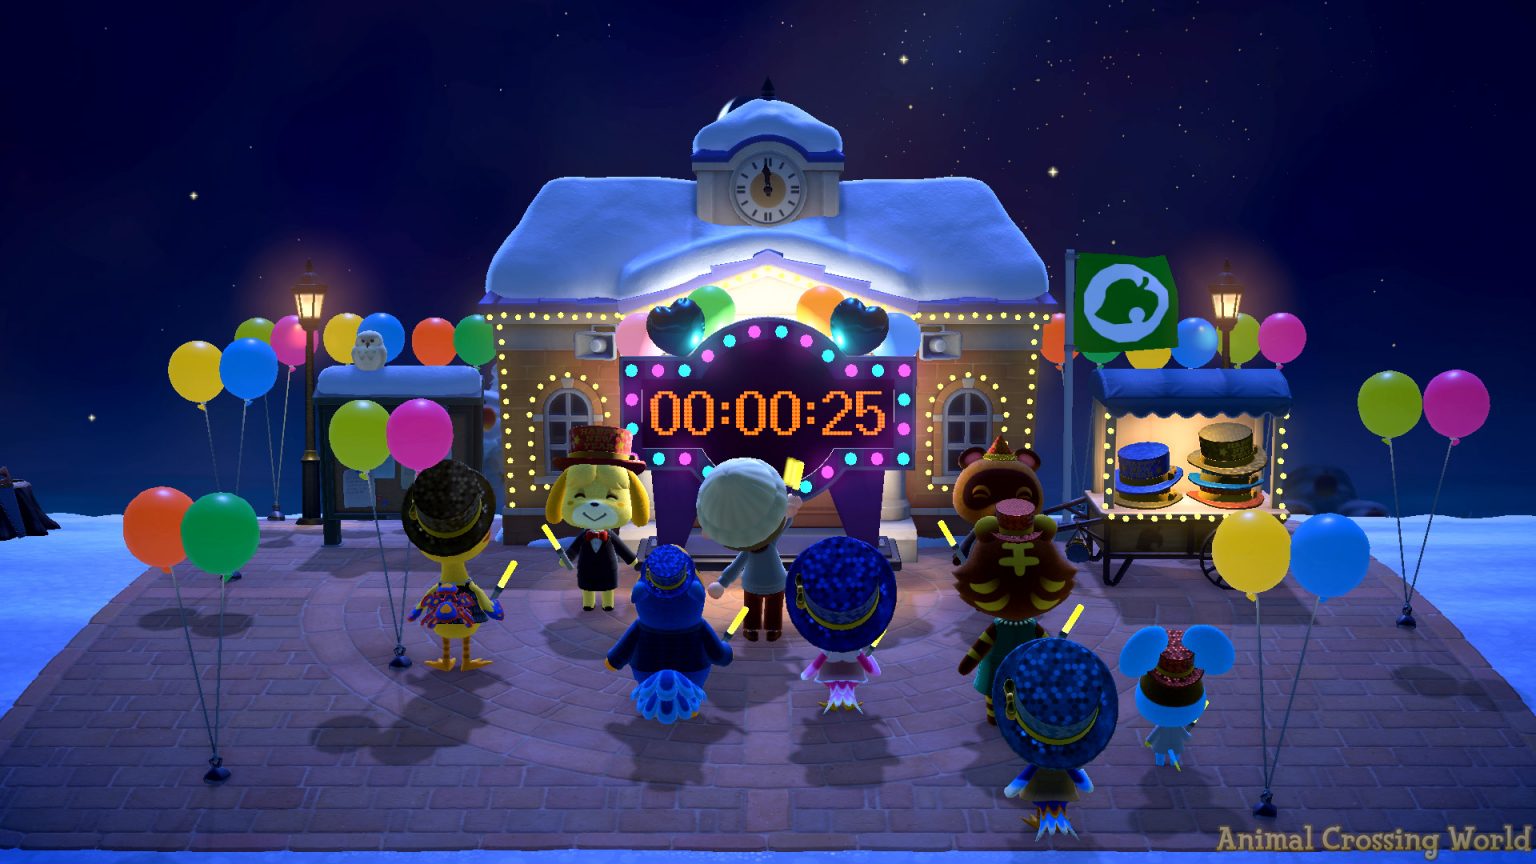 Celebrate New Year's Eve 2021 In Animal Crossing New Horizons Tonight